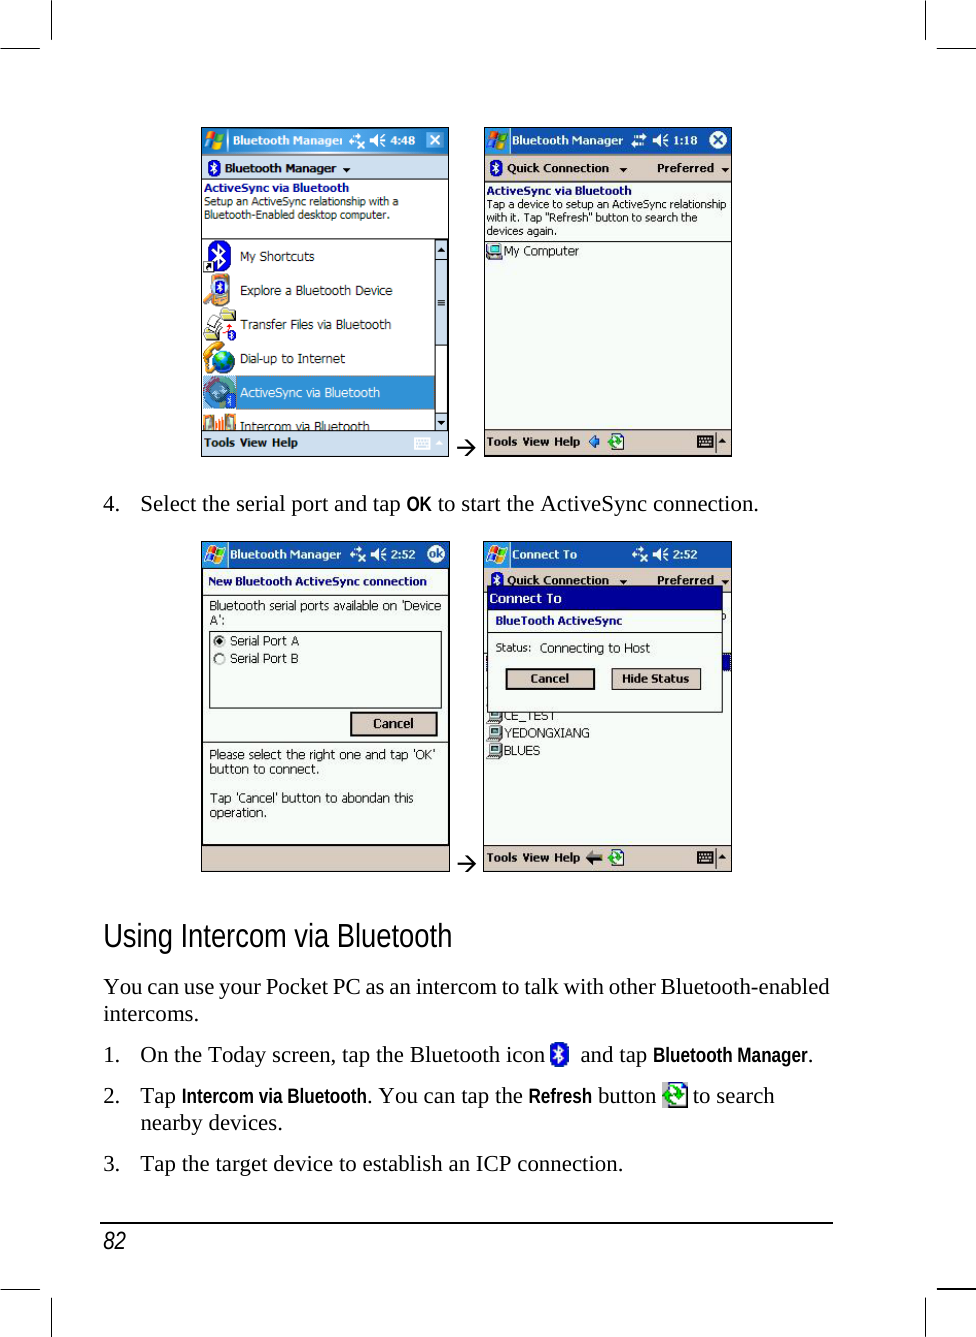  82    4.  Select the serial port and tap OK to start the ActiveSync connection.     Using Intercom via Bluetooth You can use your Pocket PC as an intercom to talk with other Bluetooth-enabled intercoms.  1.  On the Today screen, tap the Bluetooth icon    and tap Bluetooth Manager. 2. Tap Intercom via Bluetooth. You can tap the Refresh button   to search nearby devices. 3.  Tap the target device to establish an ICP connection. 